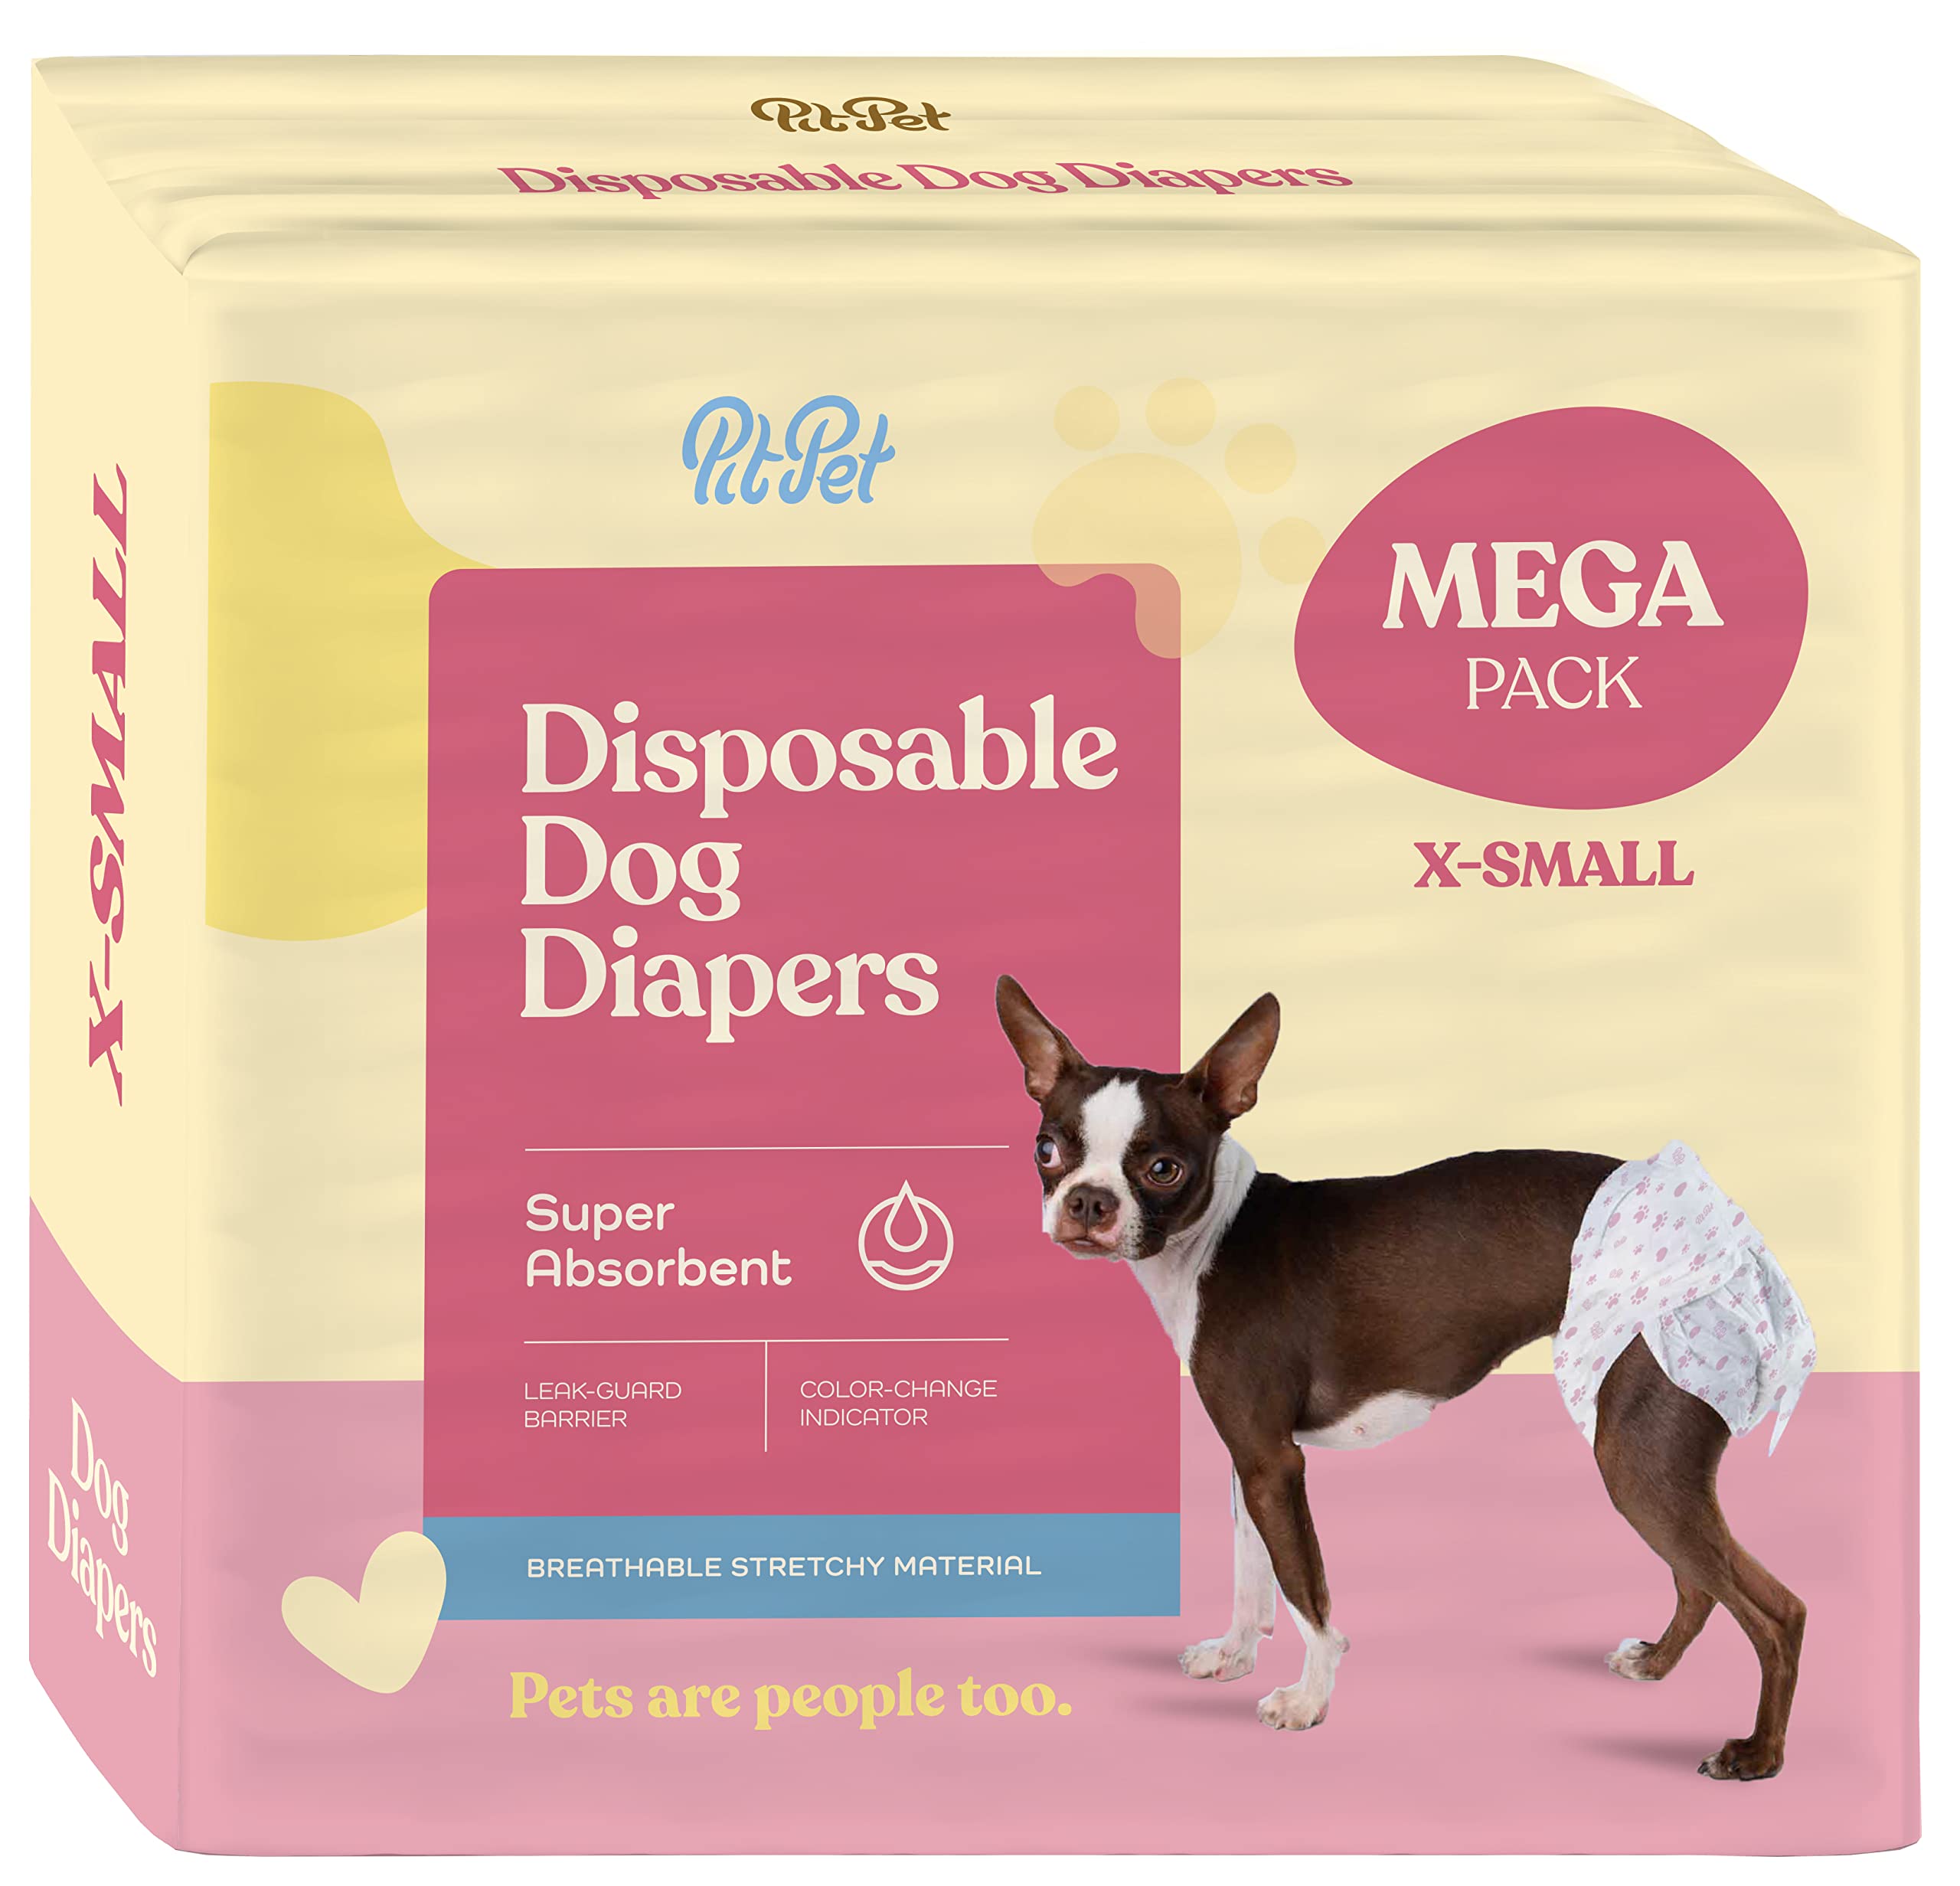 Super Absorbent Female Dog Diapers - 24-Pack Comfortable Disposable Doggie Diapers - FlashDry Gel Technology & Wetness Indicator - Leakproof Diapers for Dogs in Heat, Excitable Urination, Incontinence  - Like New